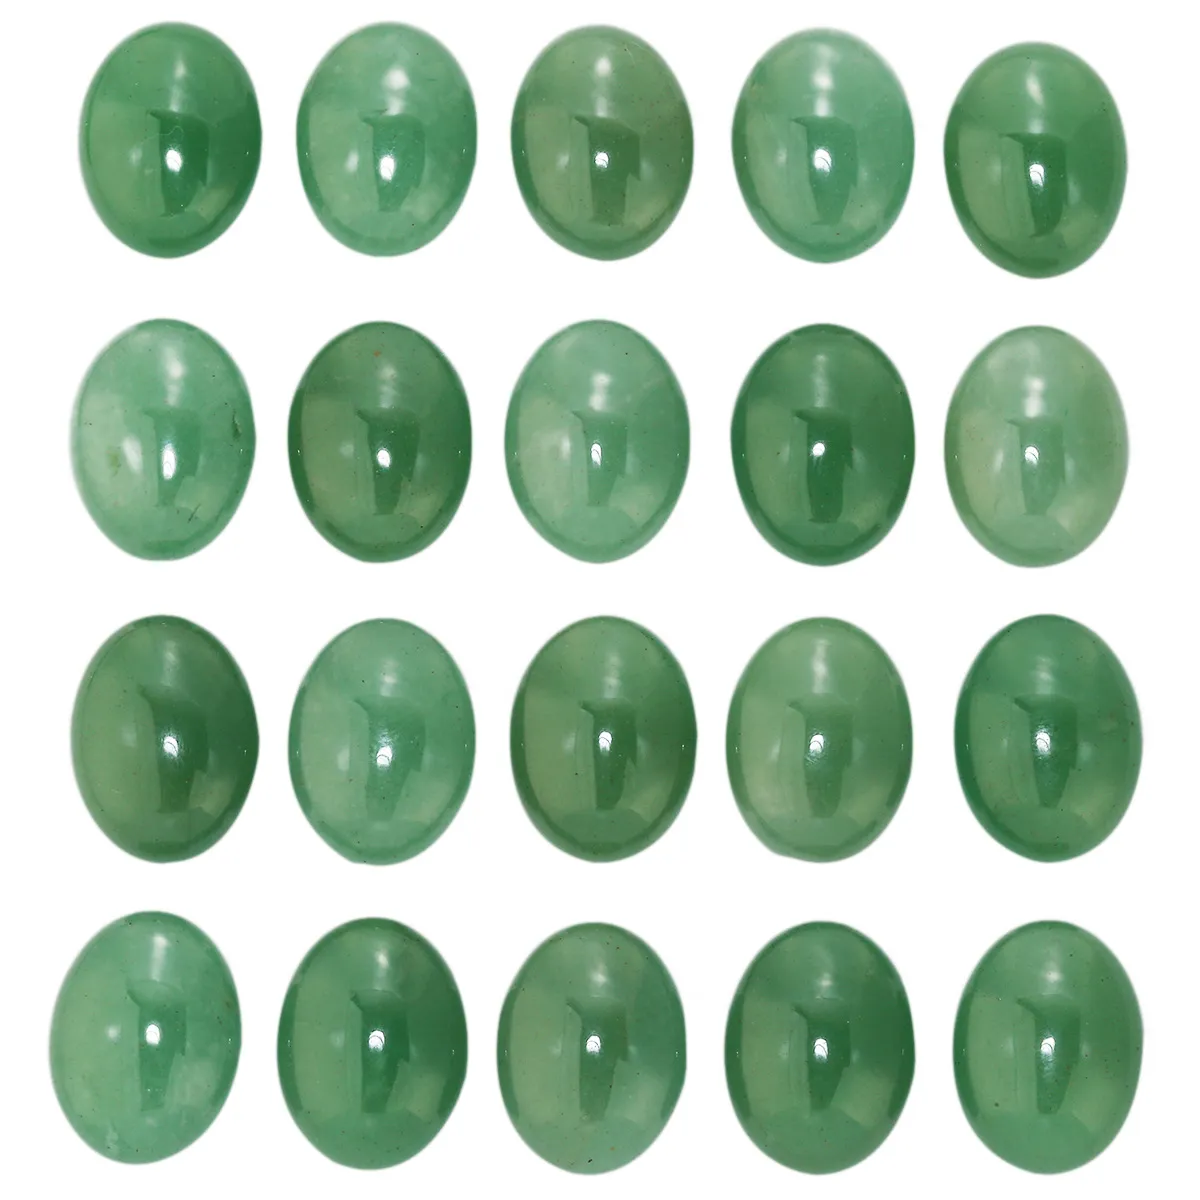 Natural Green Aventurine Ovaal Flat Back Gemstone Cabochons Healing Chakra Crystal Steen Bead Cab Cable Covers Geen gat voor Sieraden Craft Making